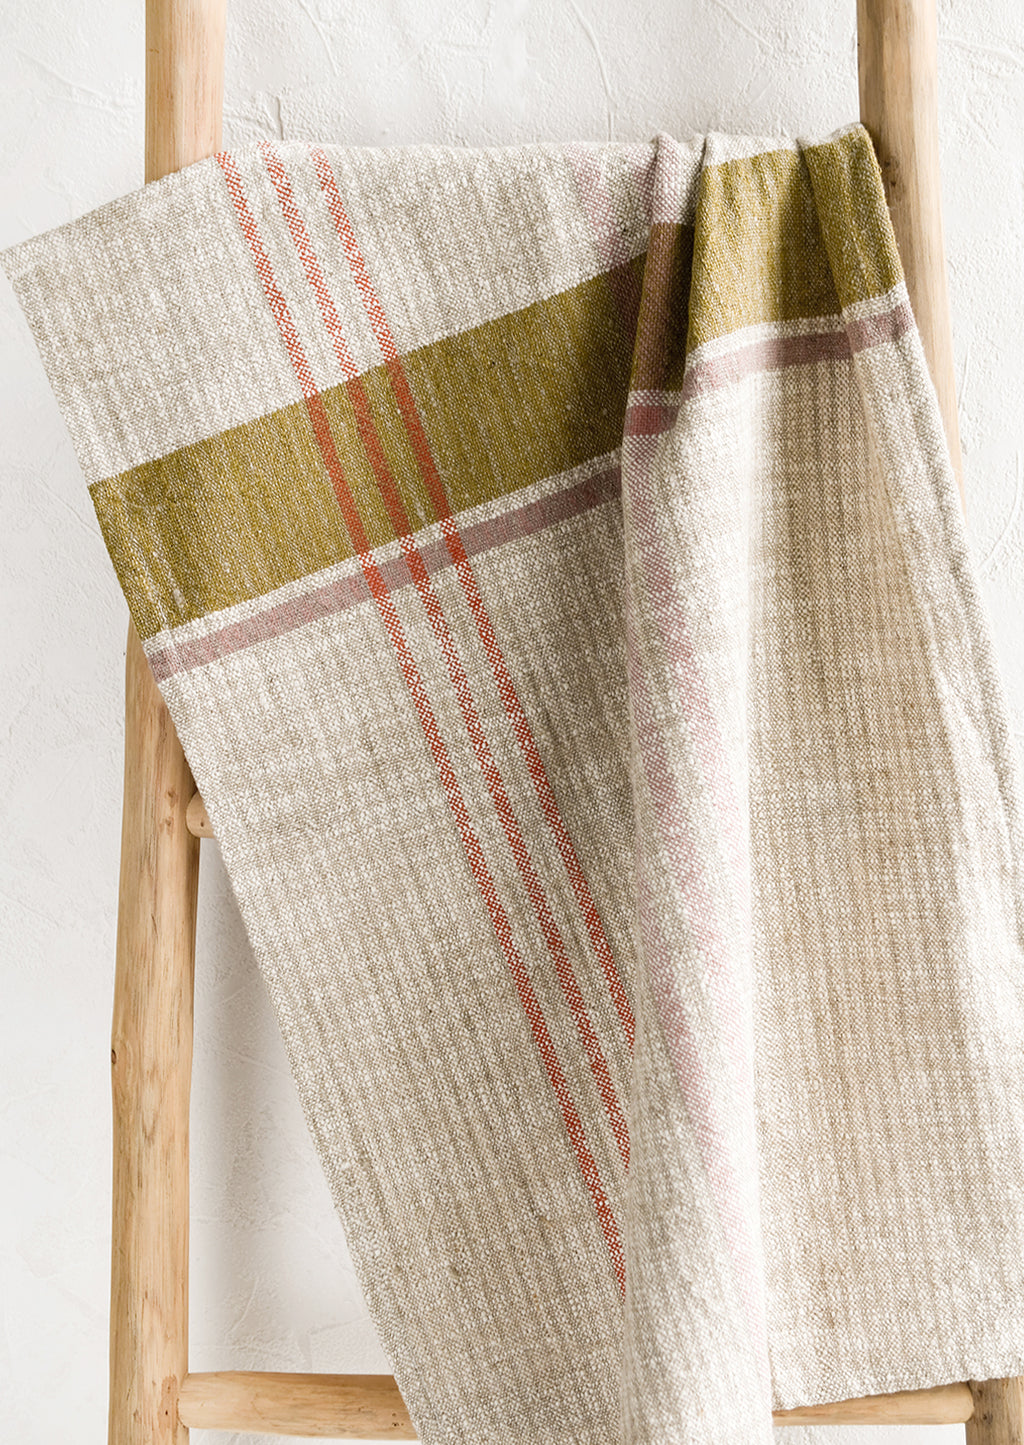 2: A natural tea towel with orange, ochre and pink plaid pattern.